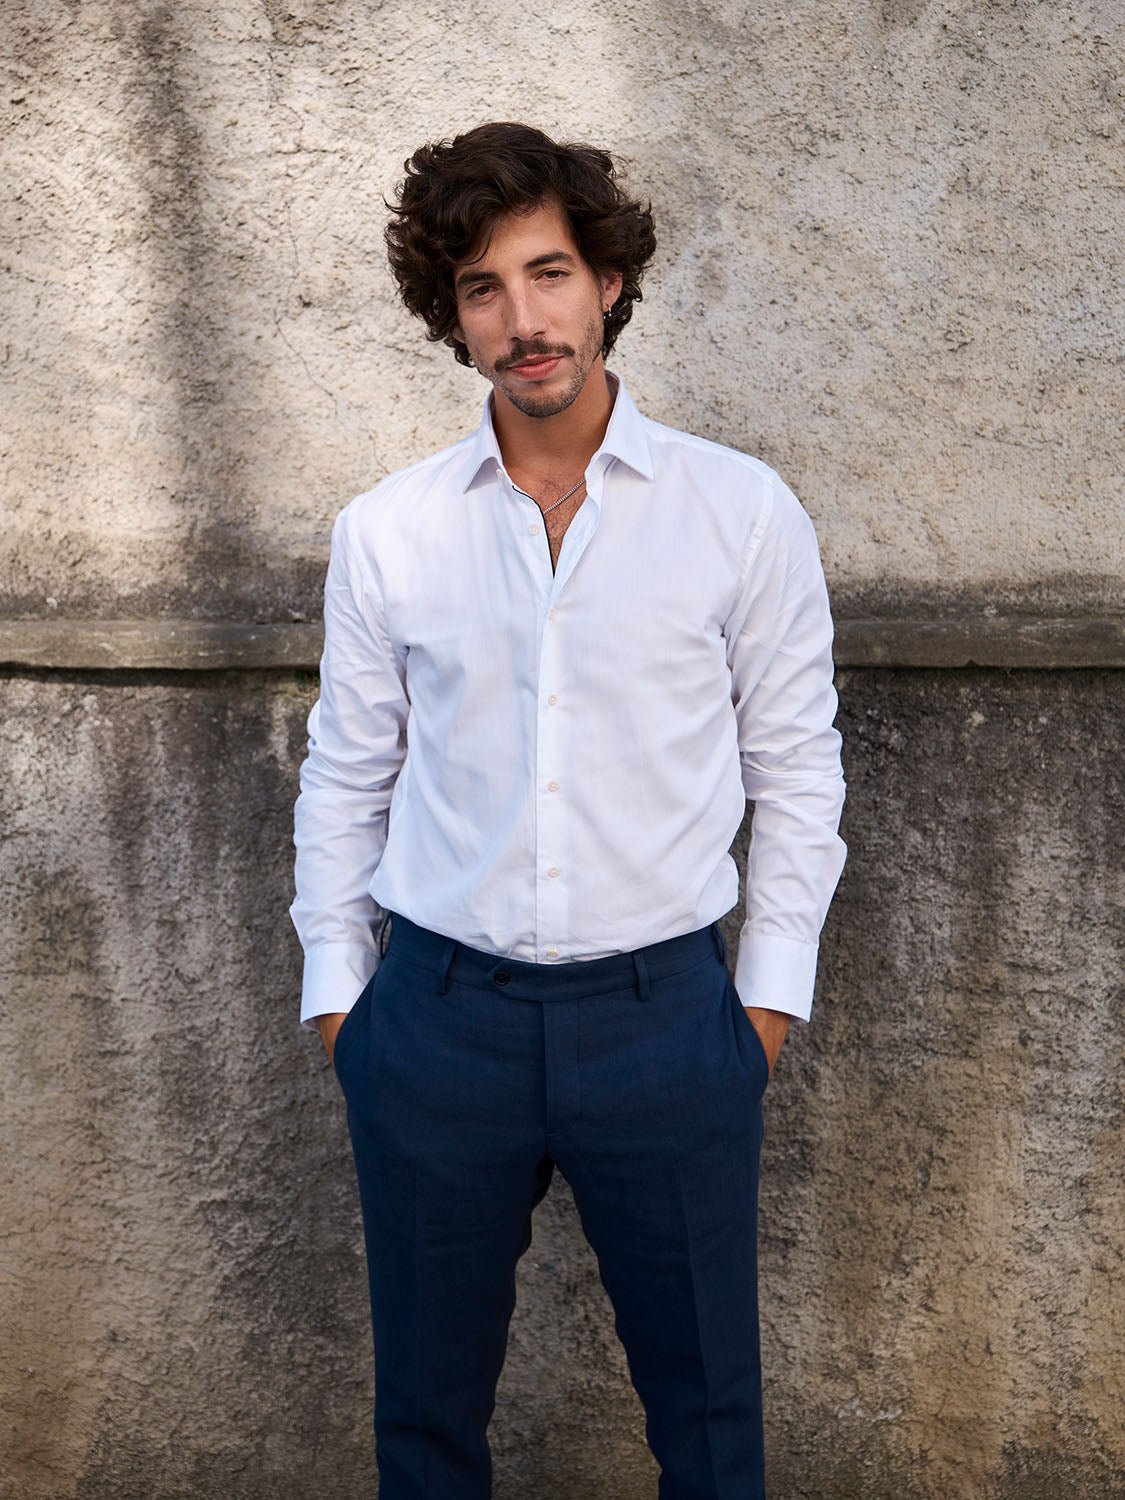 What To Wear With A White Shirt - Men's White Shirt Outfits That Look  Stylish